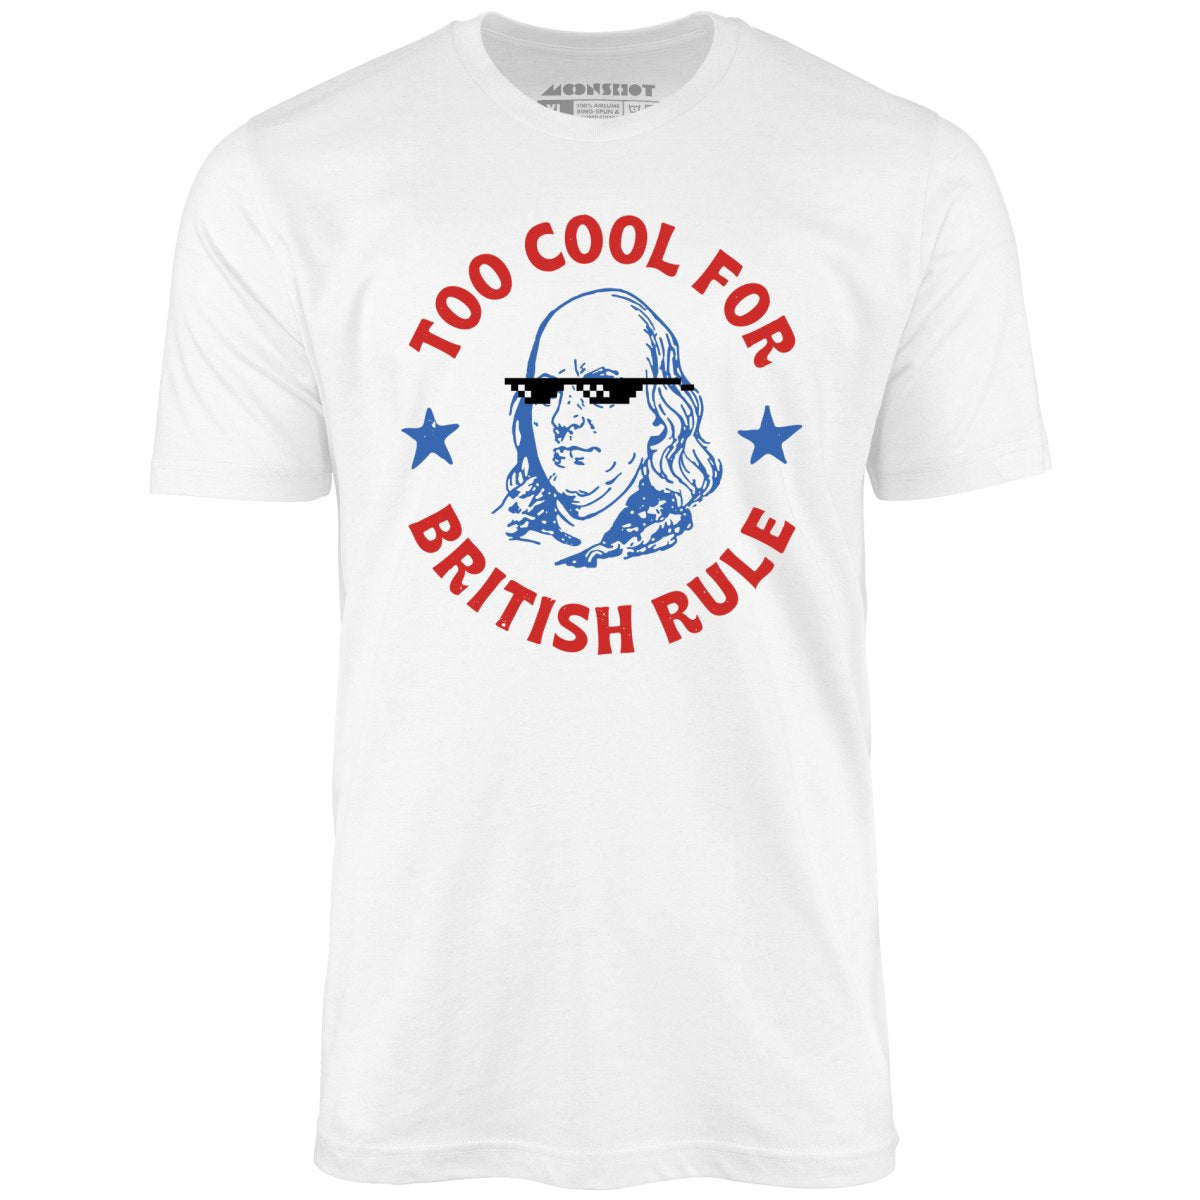 Too Cool For British Rule - Unisex T-Shirt